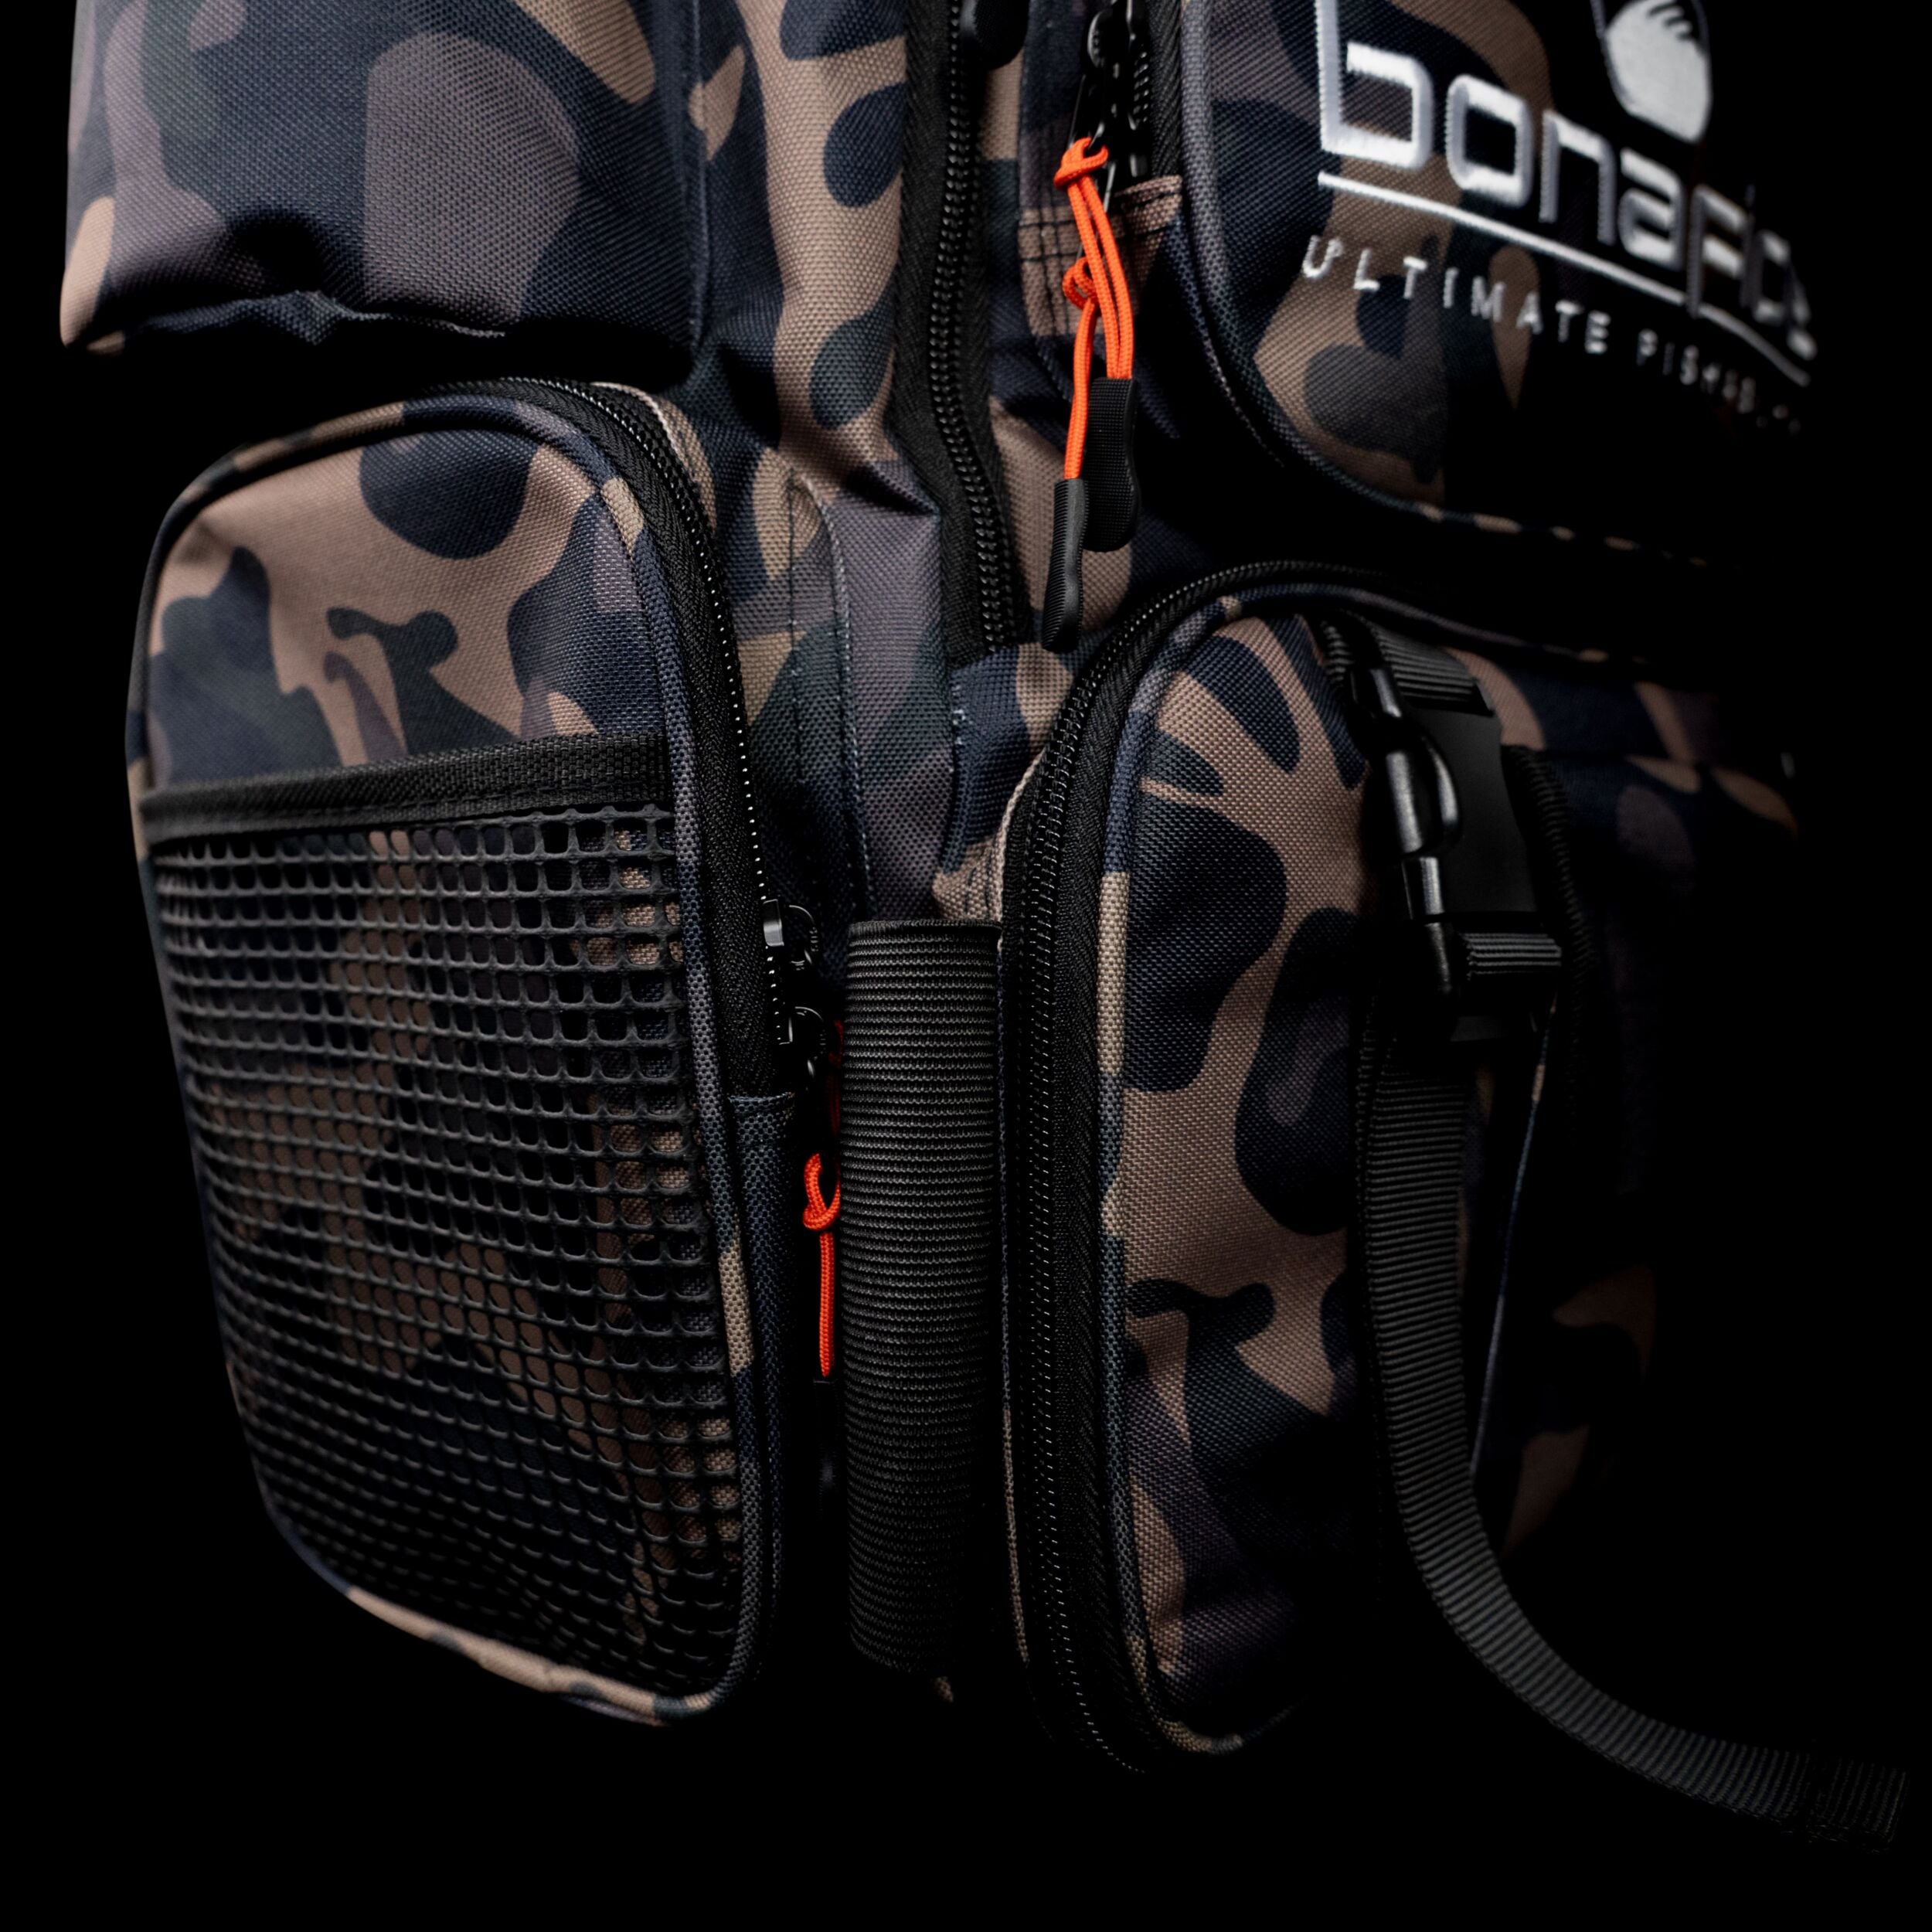 Oh, the sweet sounds of packing your @bonafidefish sideline fishing bag 🤤  Backpack or sling, it'll be the best tackle bag you've e